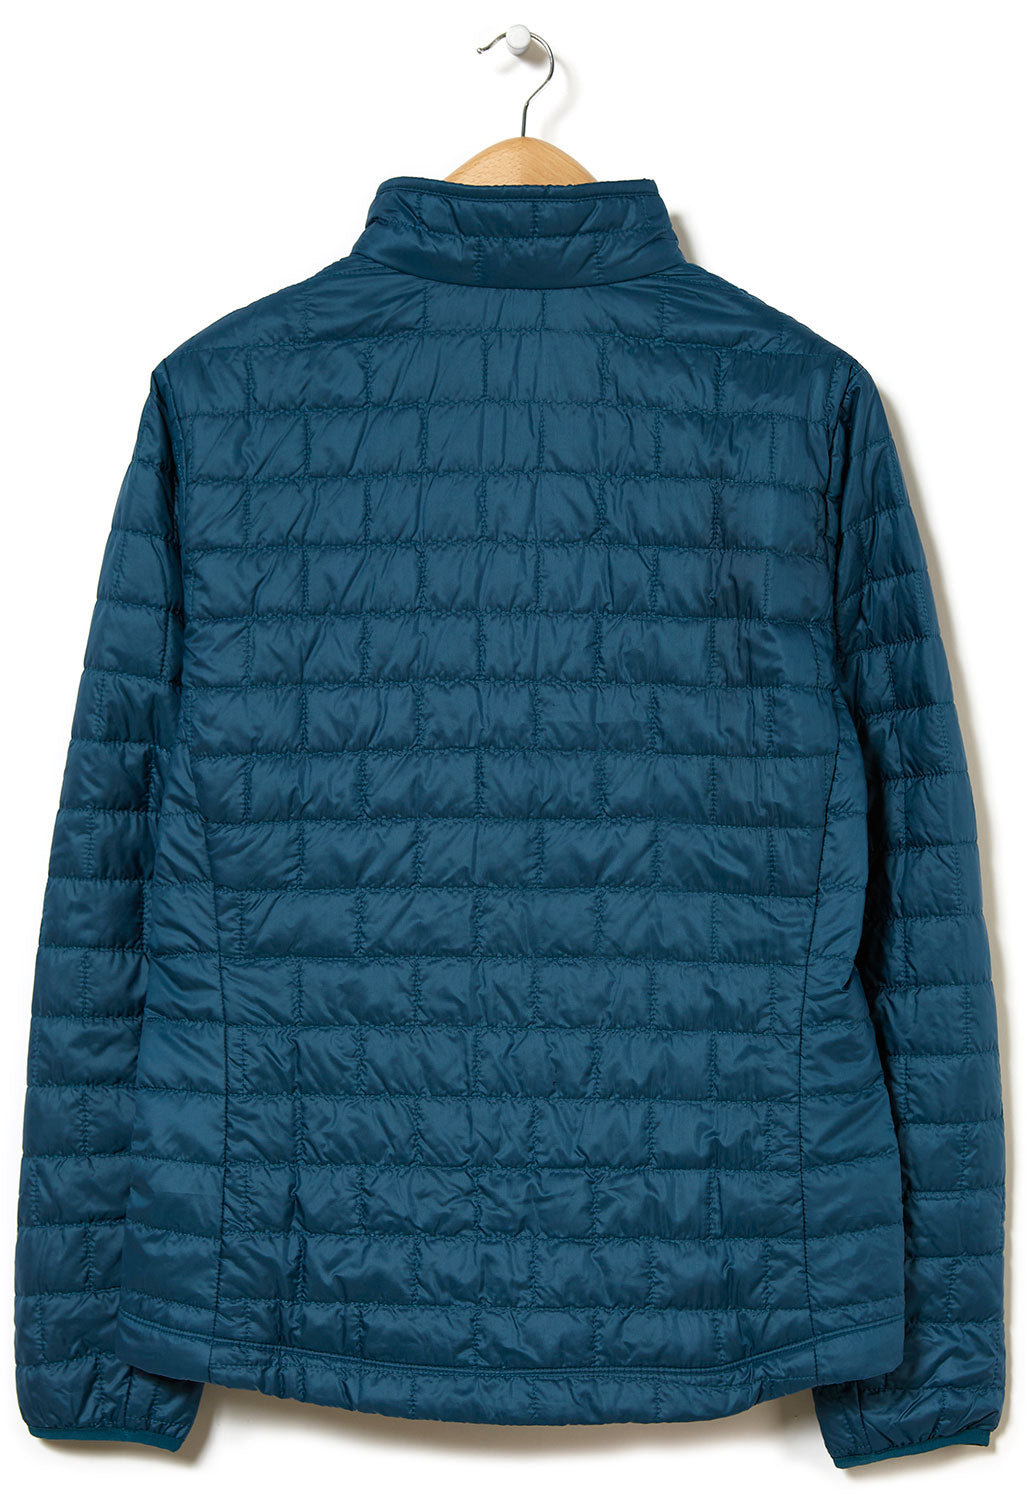 Patagonia Nano Puff Men's Insulated Jacket - Crater Blue